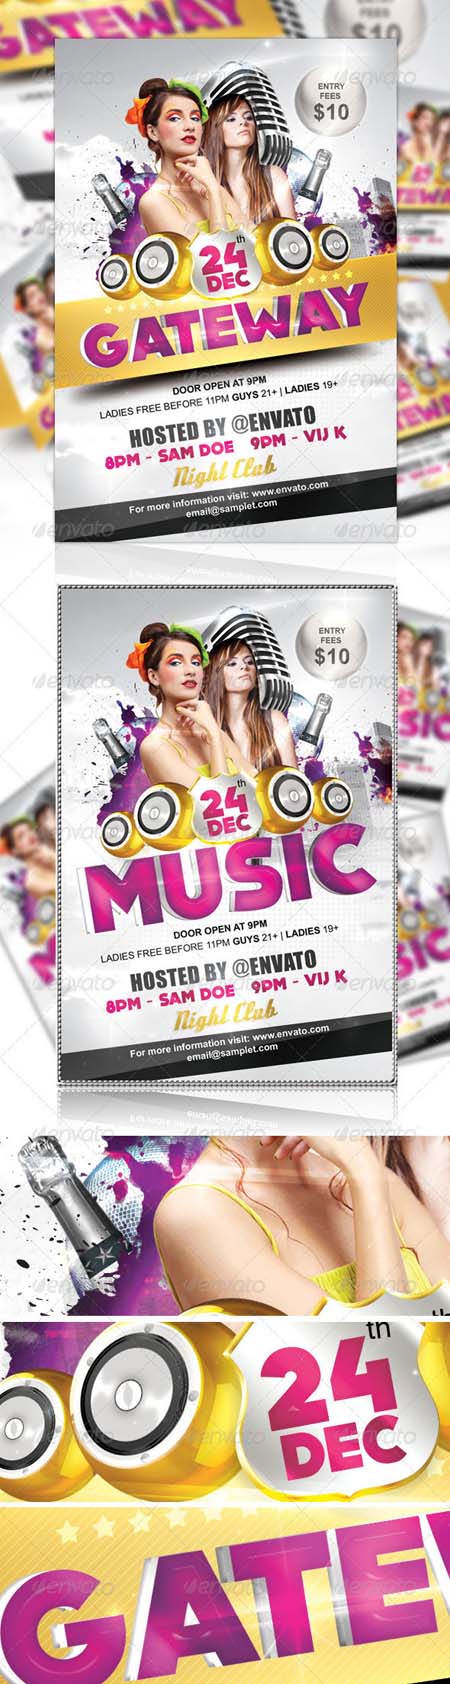 GraphicRiver: Gateway Party Flyer